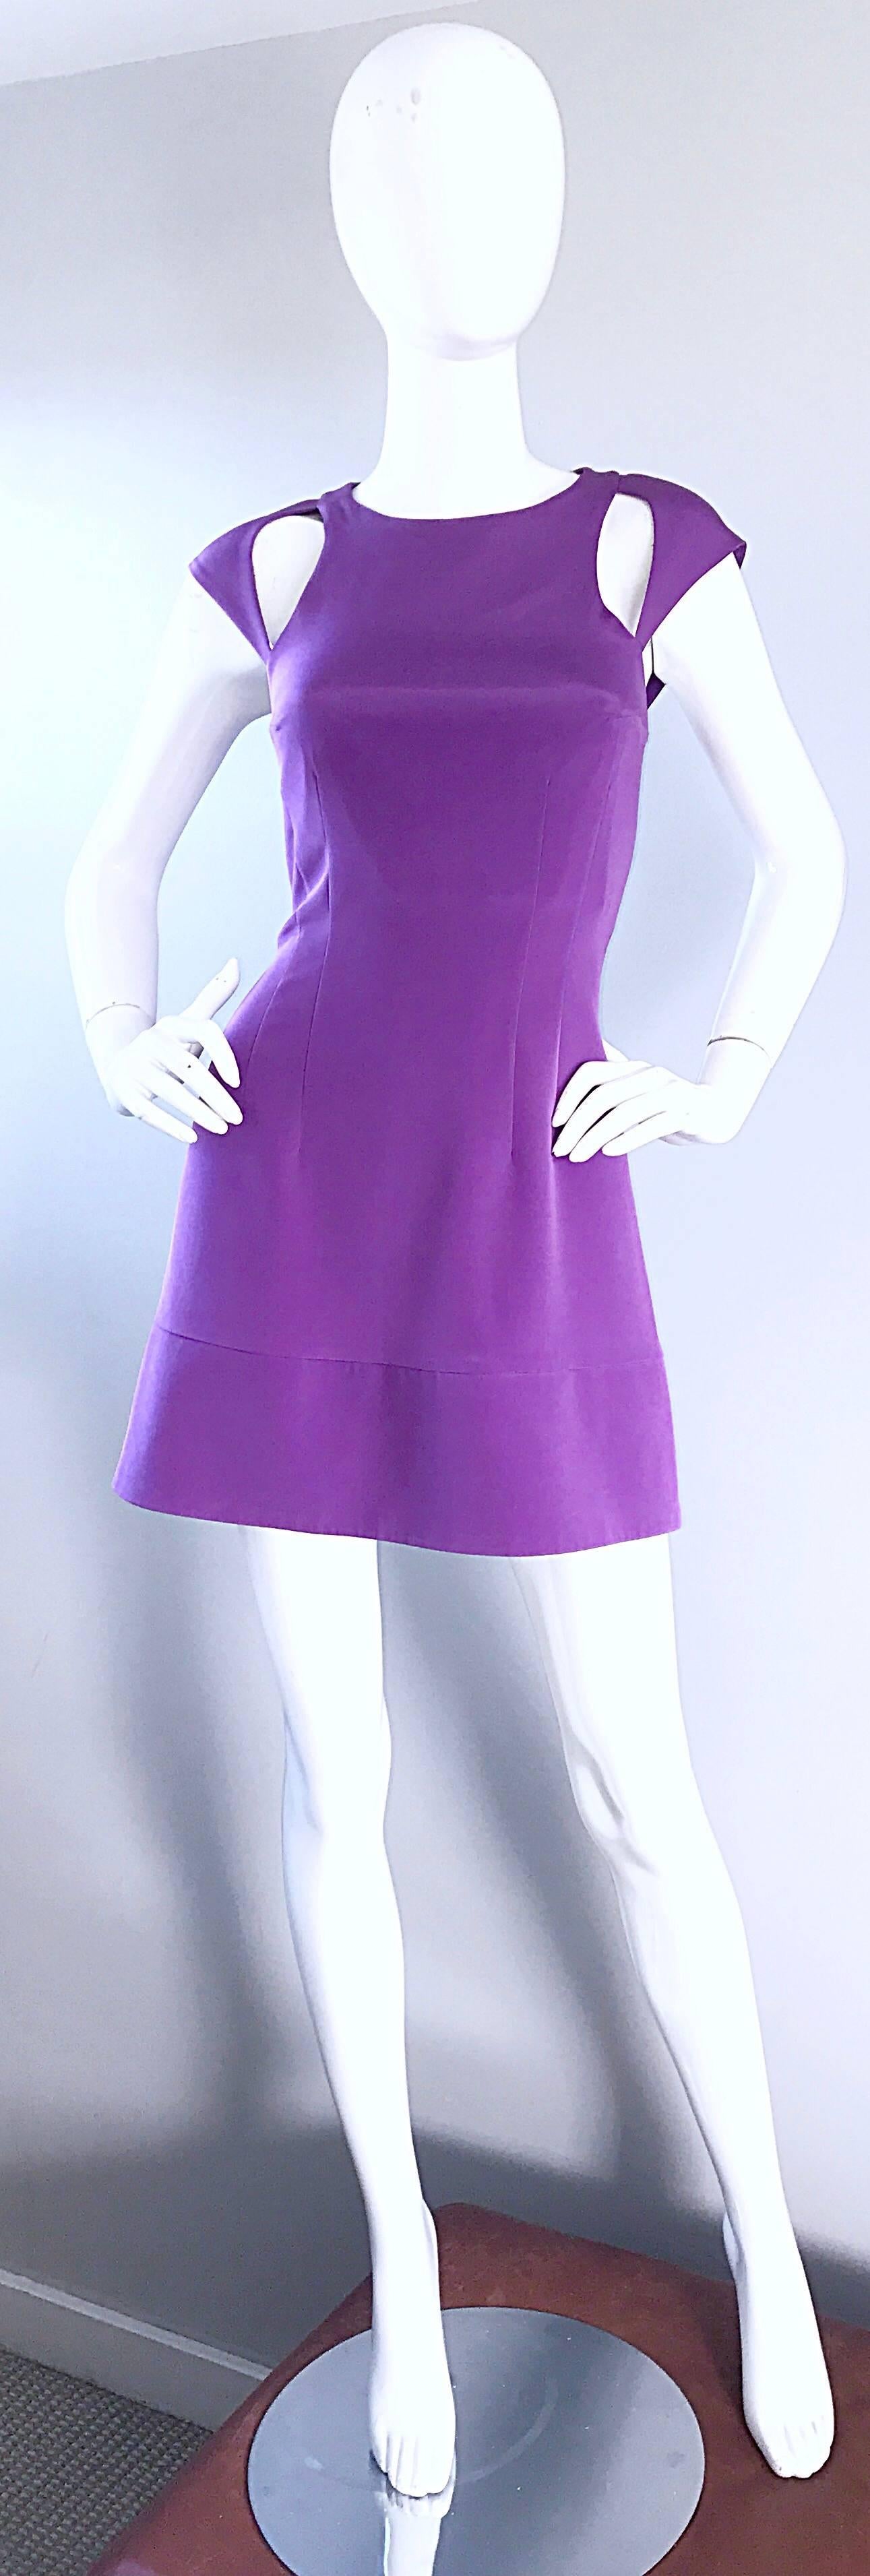 Brand new JAY GODFREY lilac purple silk and lycra cut-out cold shoulder mini dress! Fitted bodice, with a slightly flared skirt that has a 90s feel. 92.5% silk, with 7.5 % lycra. Hugs the body nicely, and stretches to fit. Hidden zipper up the back